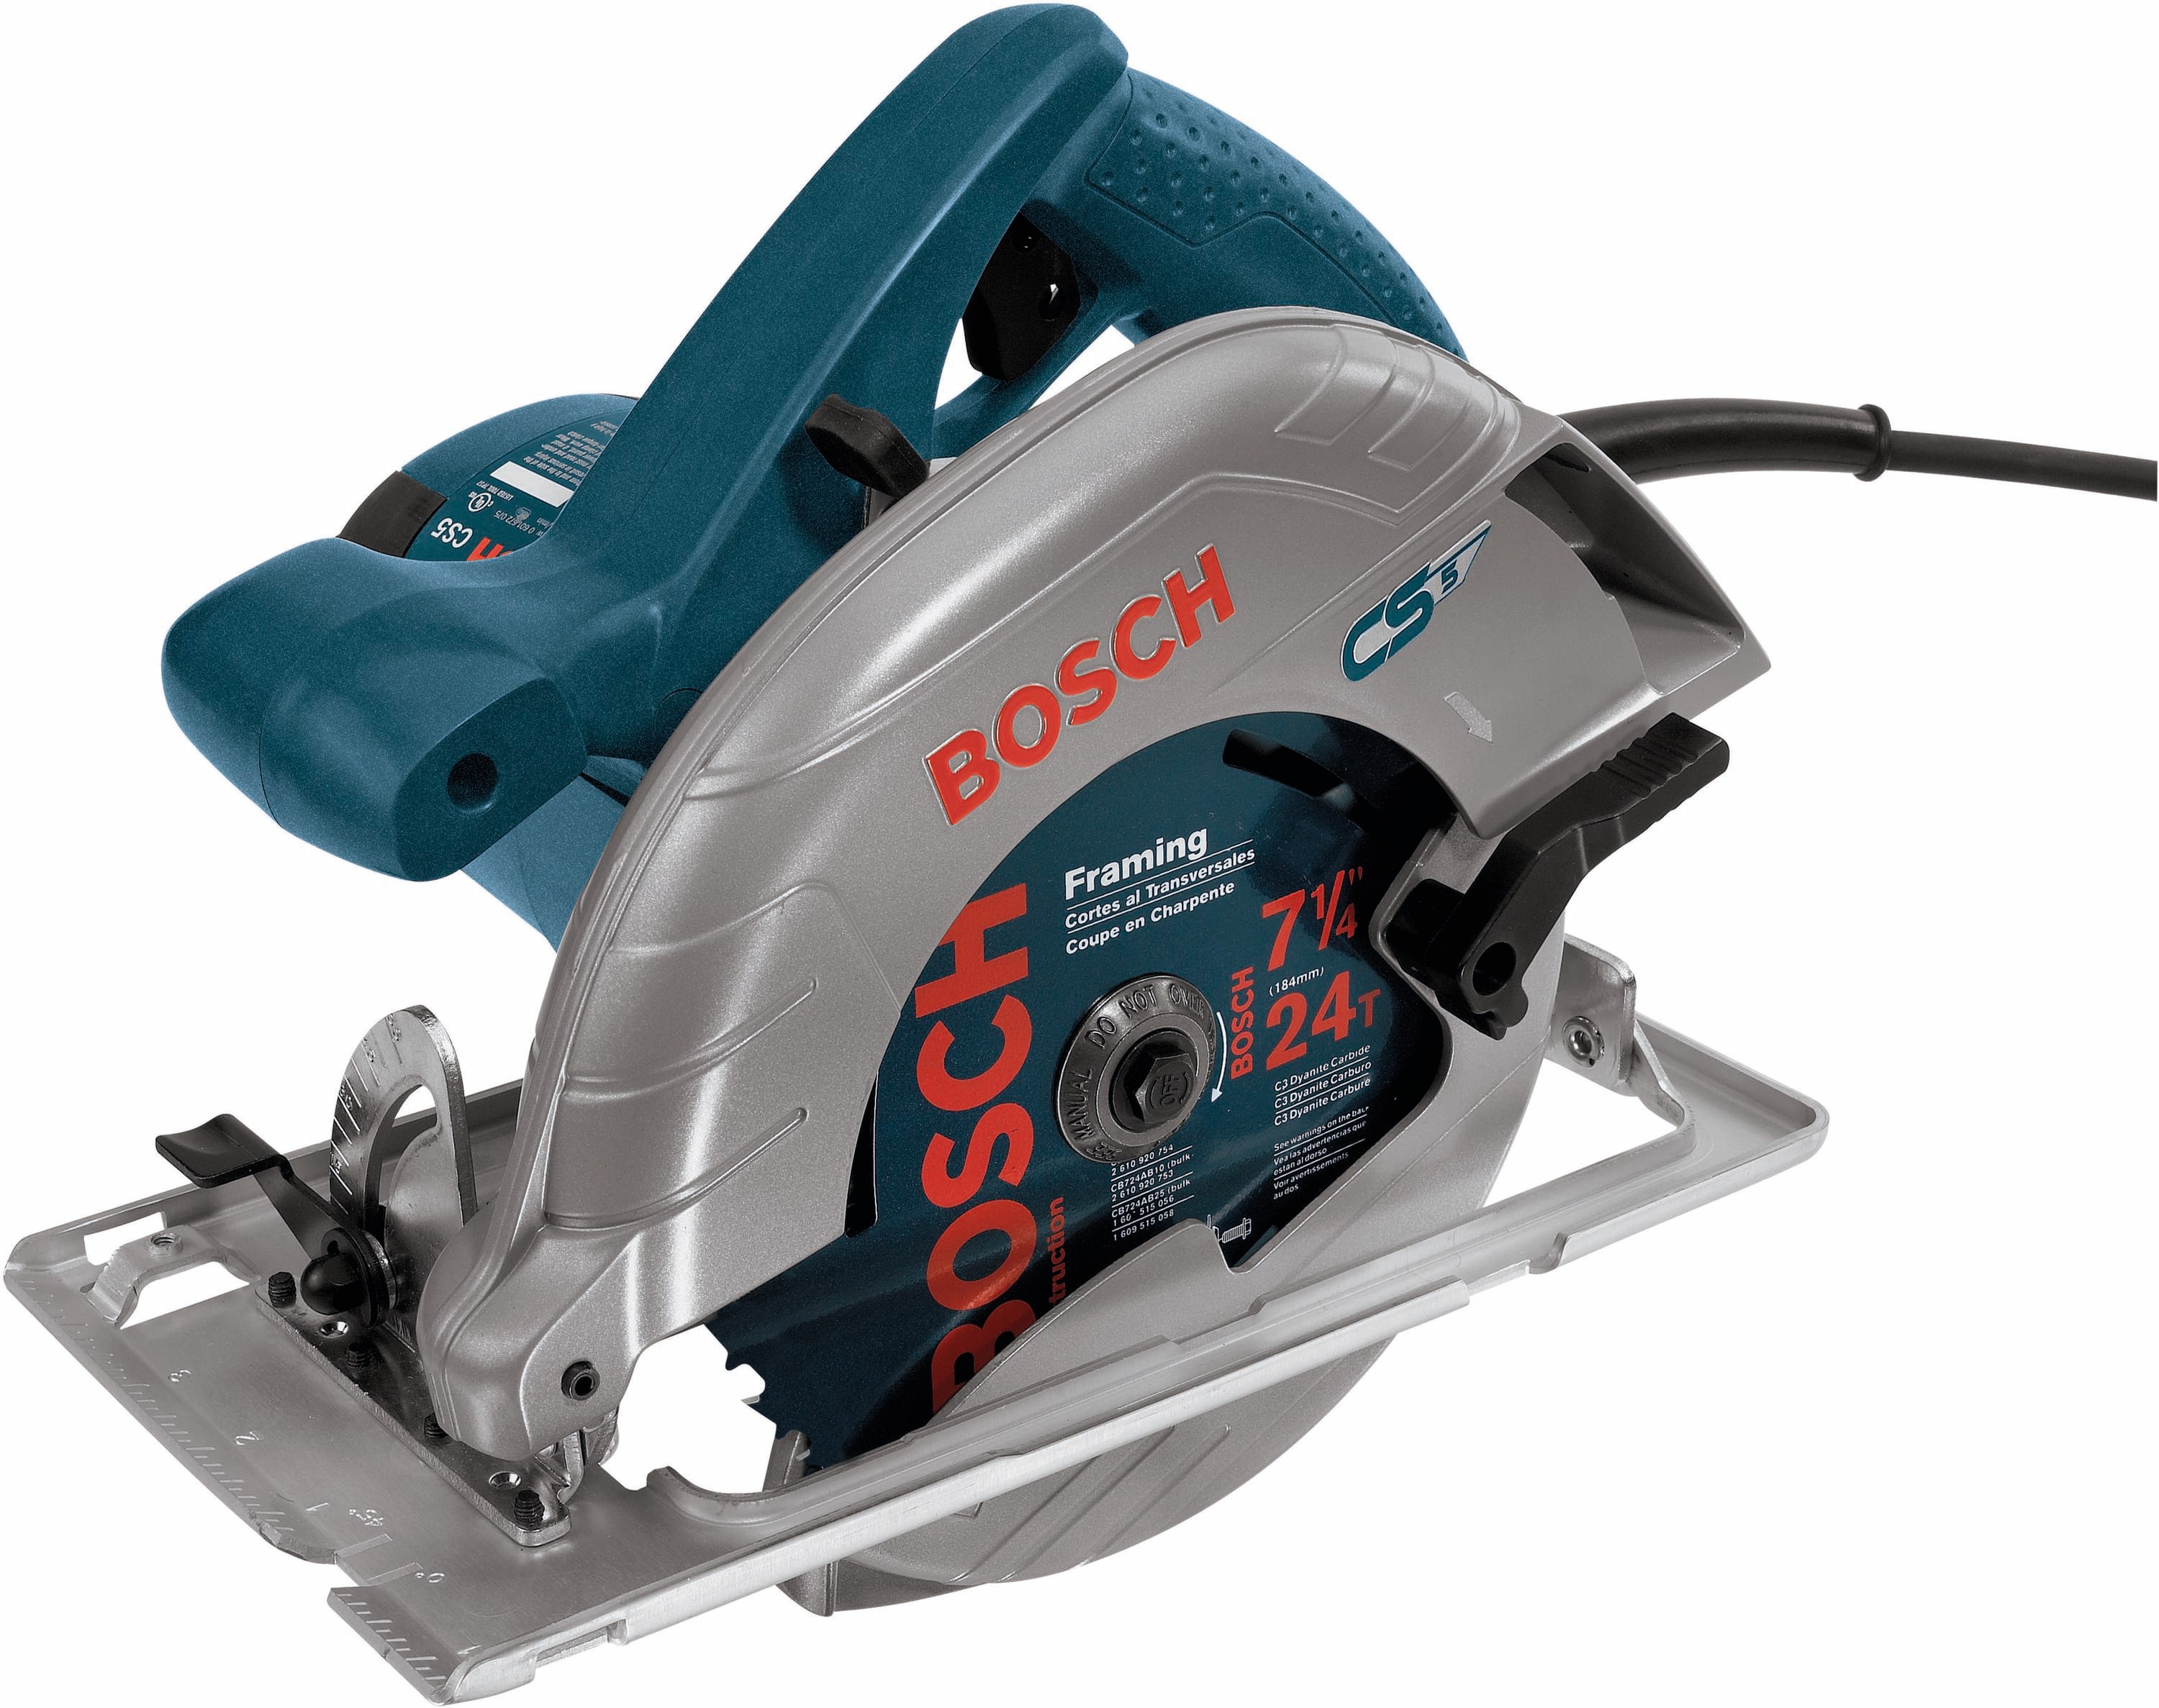 Image of Bosch GKS 7000 Professional circular saw at Lowes